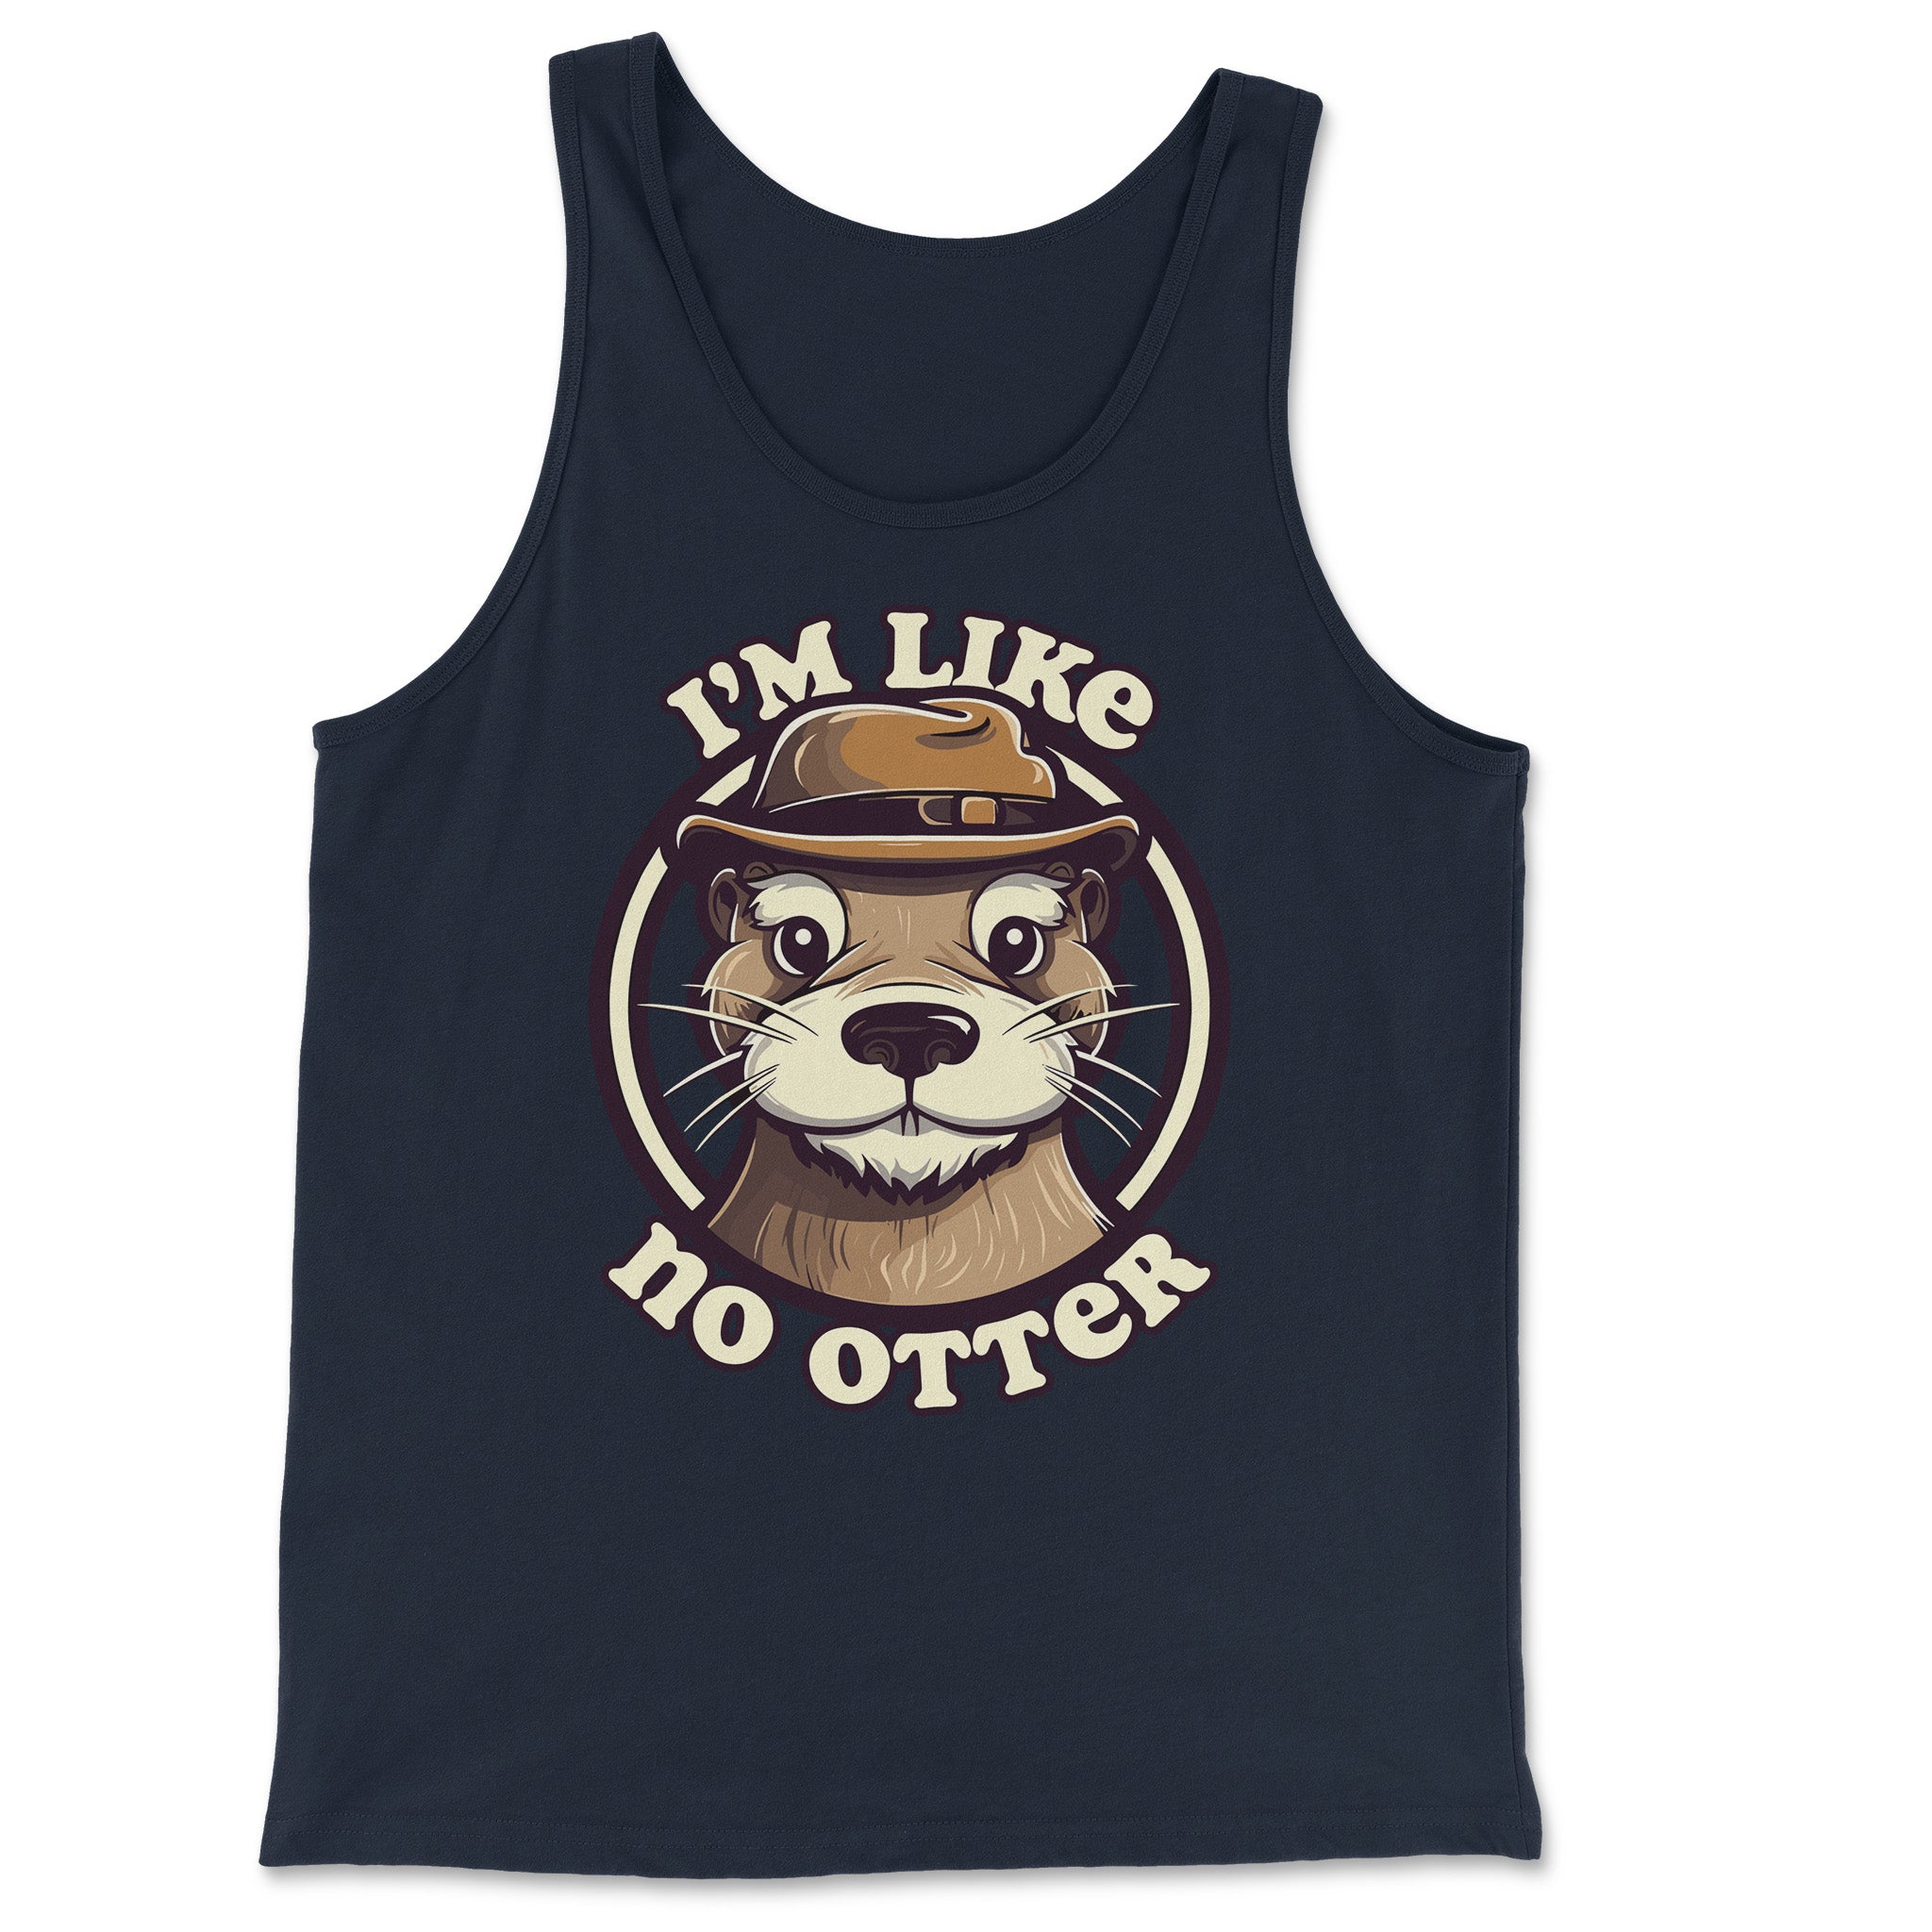 "I'm like no otter" Tank Top - Embrace Your Otter Pride - Hunky Tops#color_navy